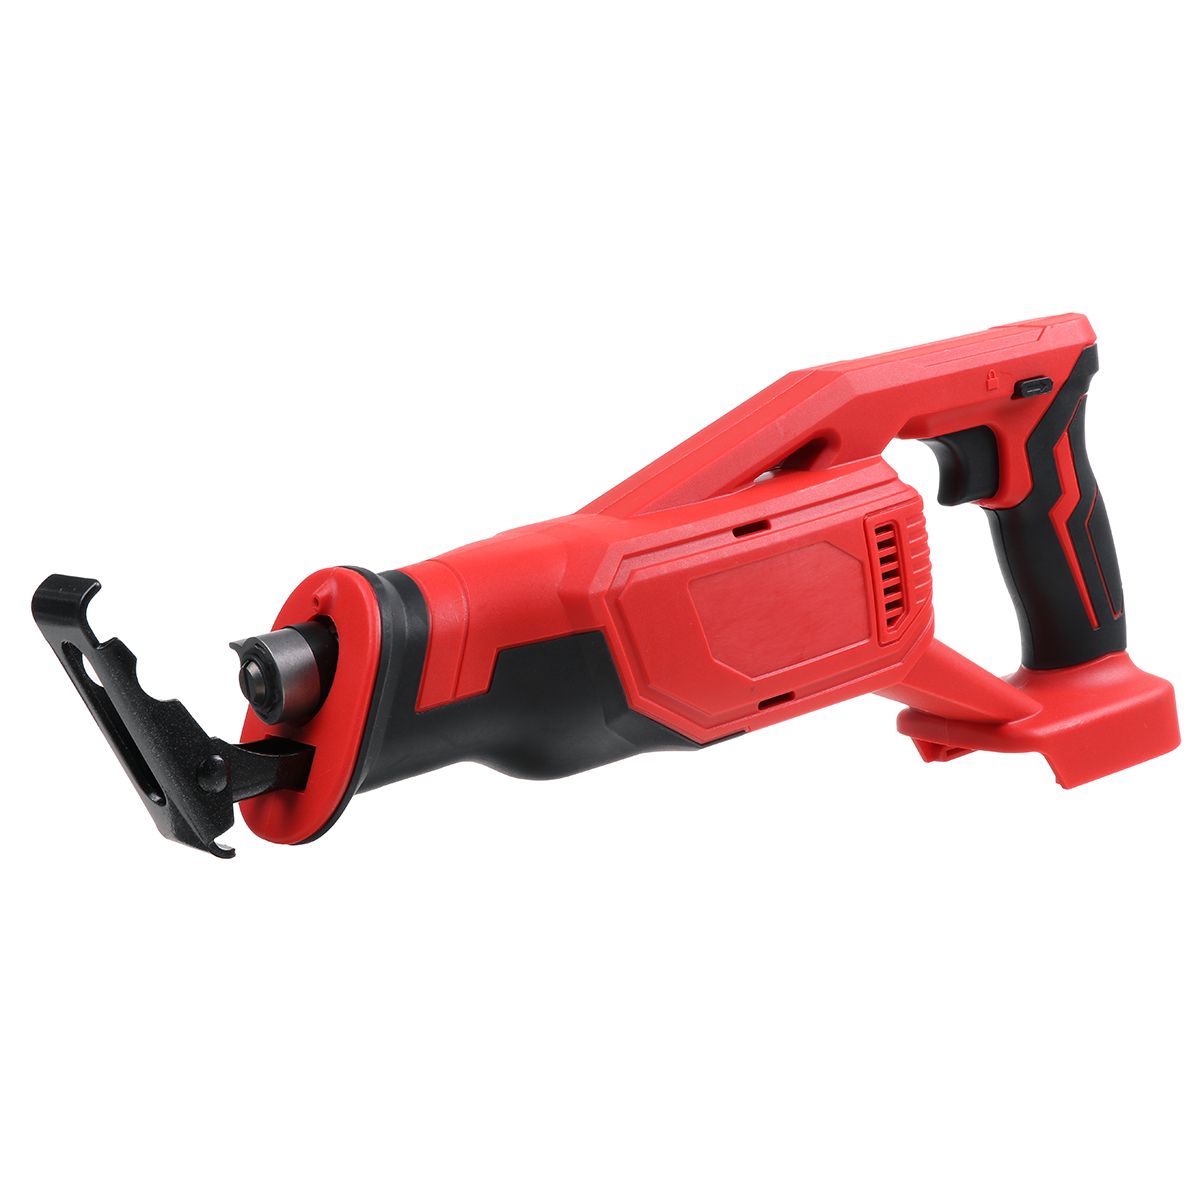 4000mAh-Cordless-Electric-Reciprocating-Saw-Wood-Cutting-Rechargeable-Power-Tool-1725276